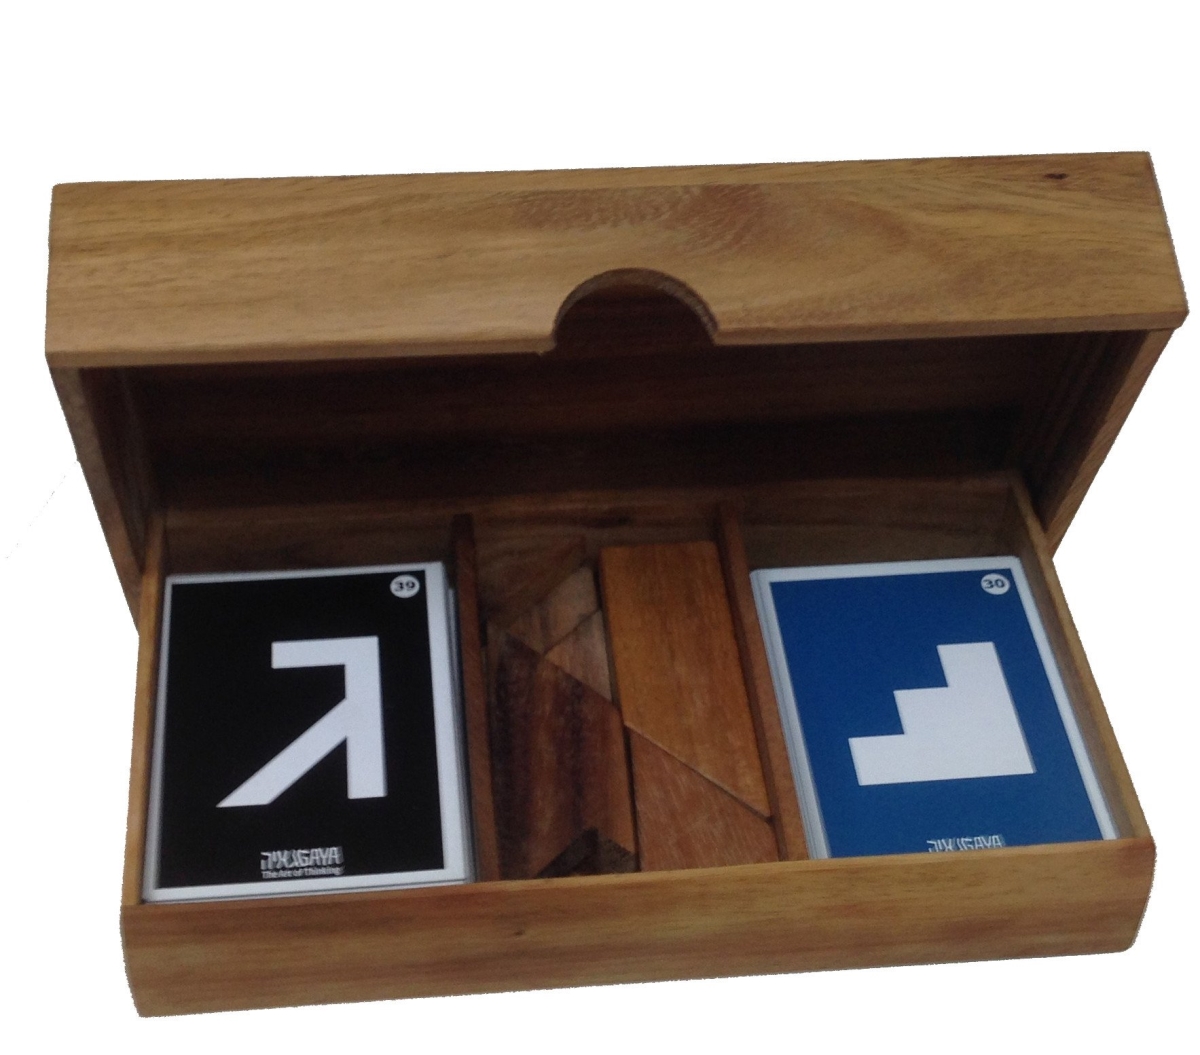 Letters & Numbers Tangram Puzzle Box